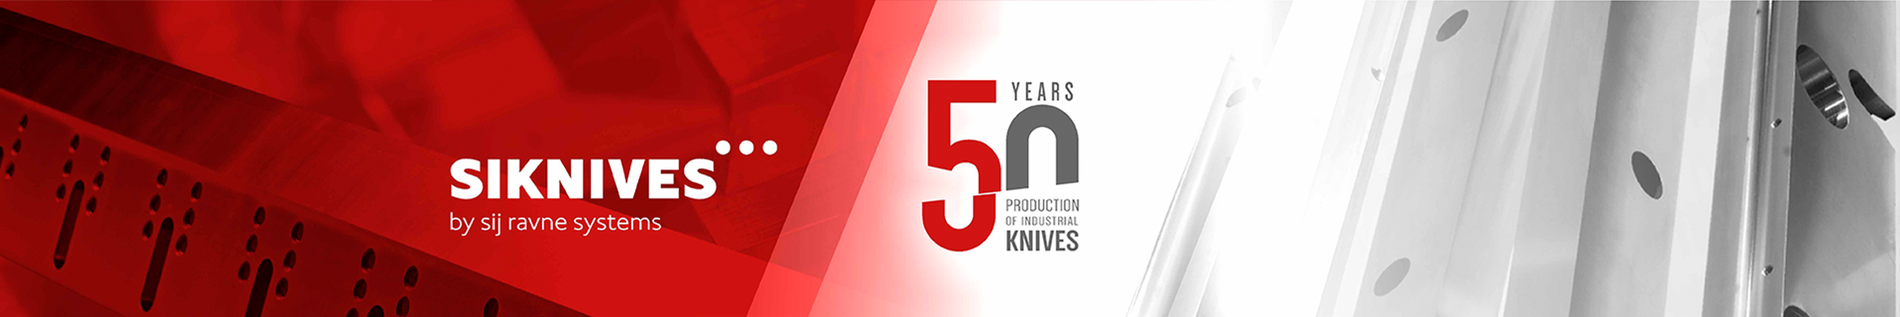 SIKNIVES web 4